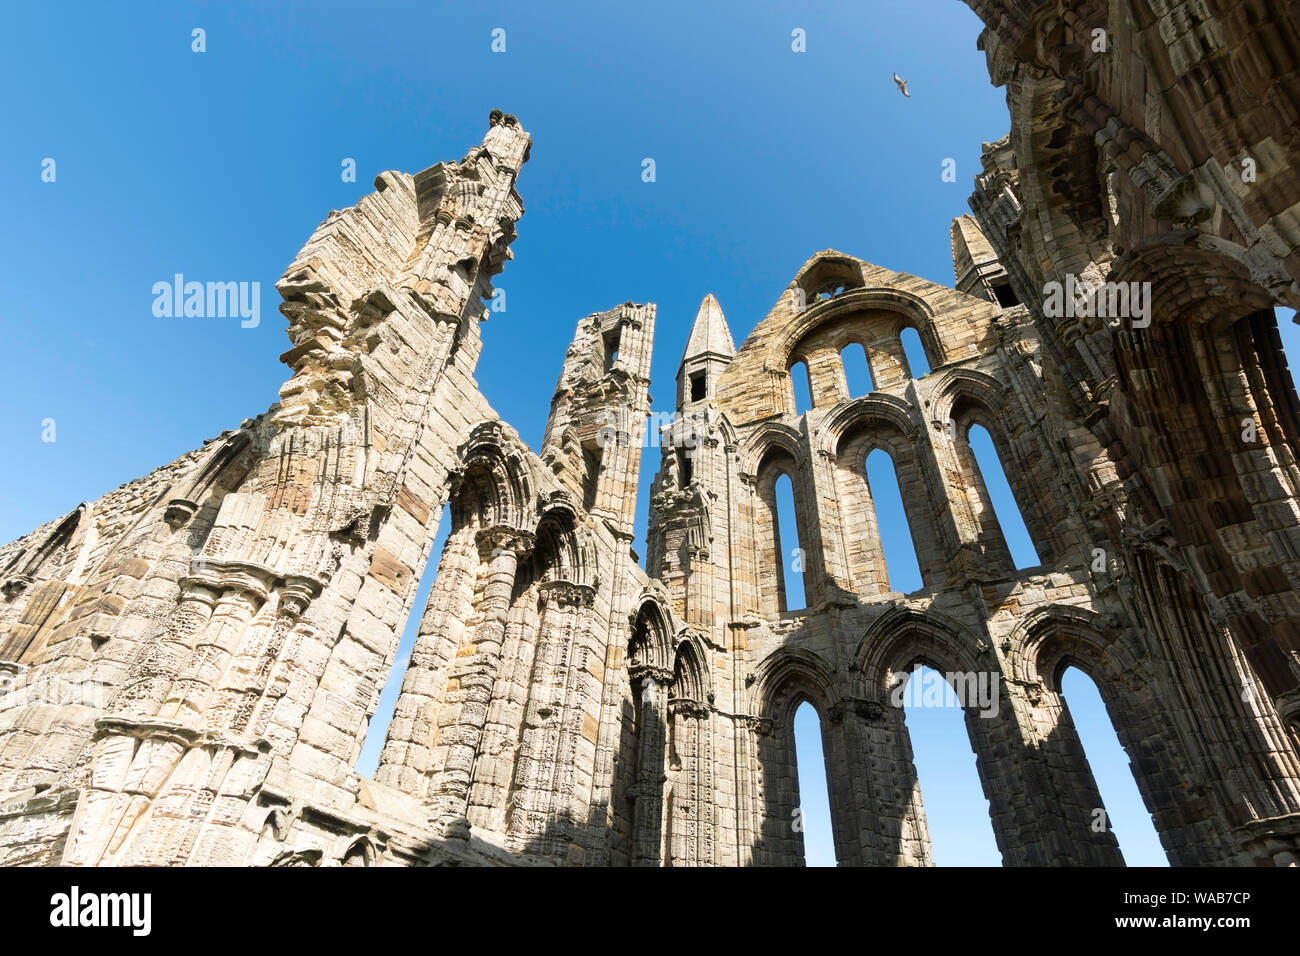 Detail view of Whitby Abbey, Yorkshire, England, UK Stock Photo